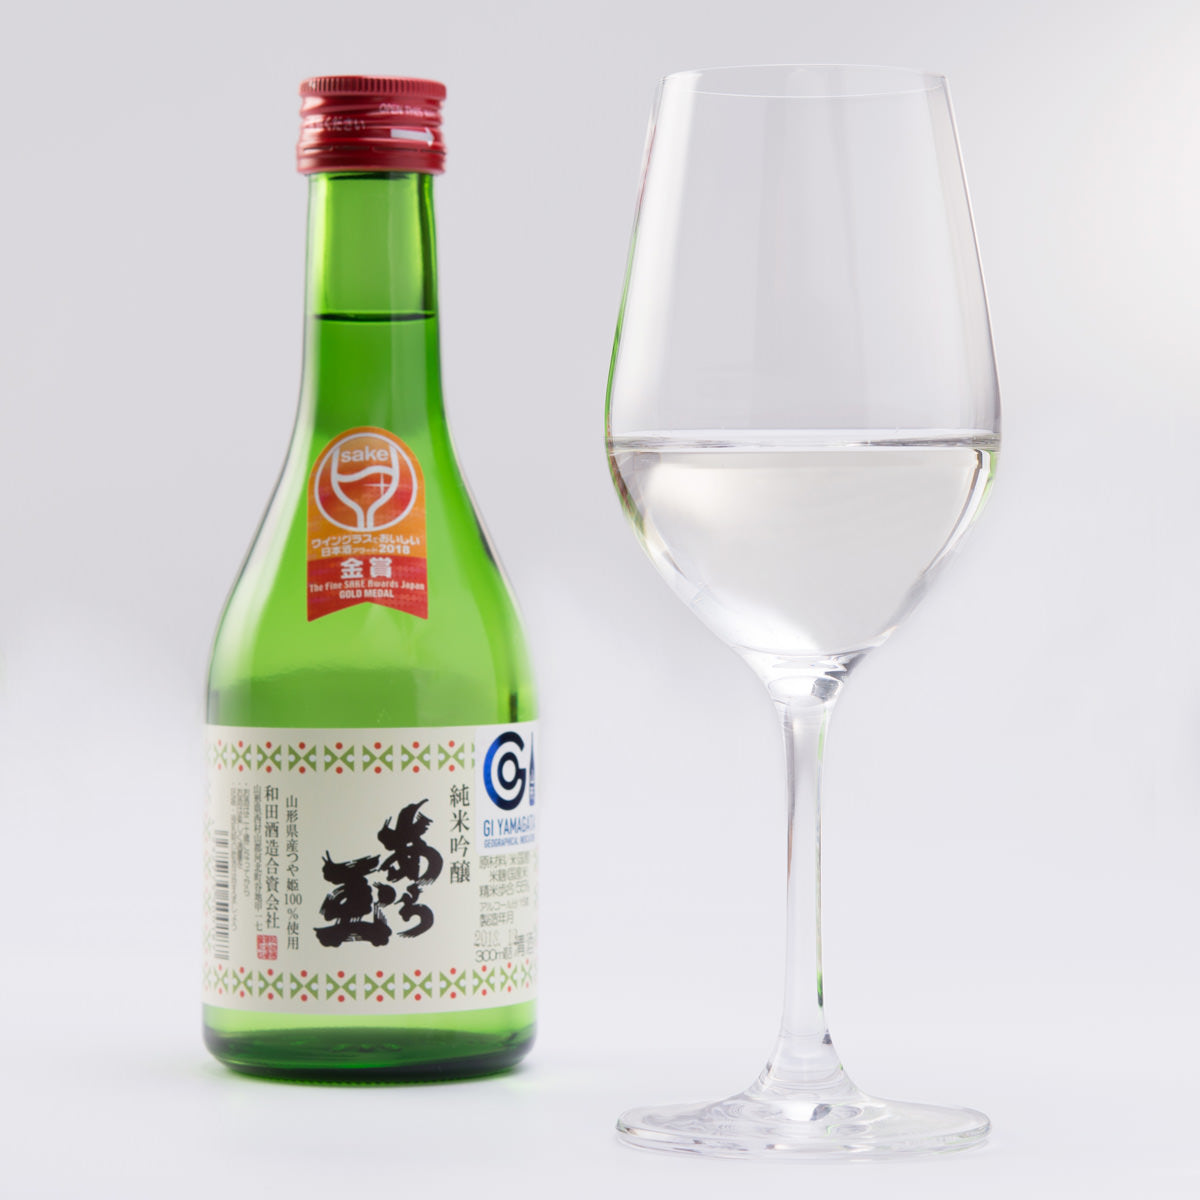 How to open a bottle of sake